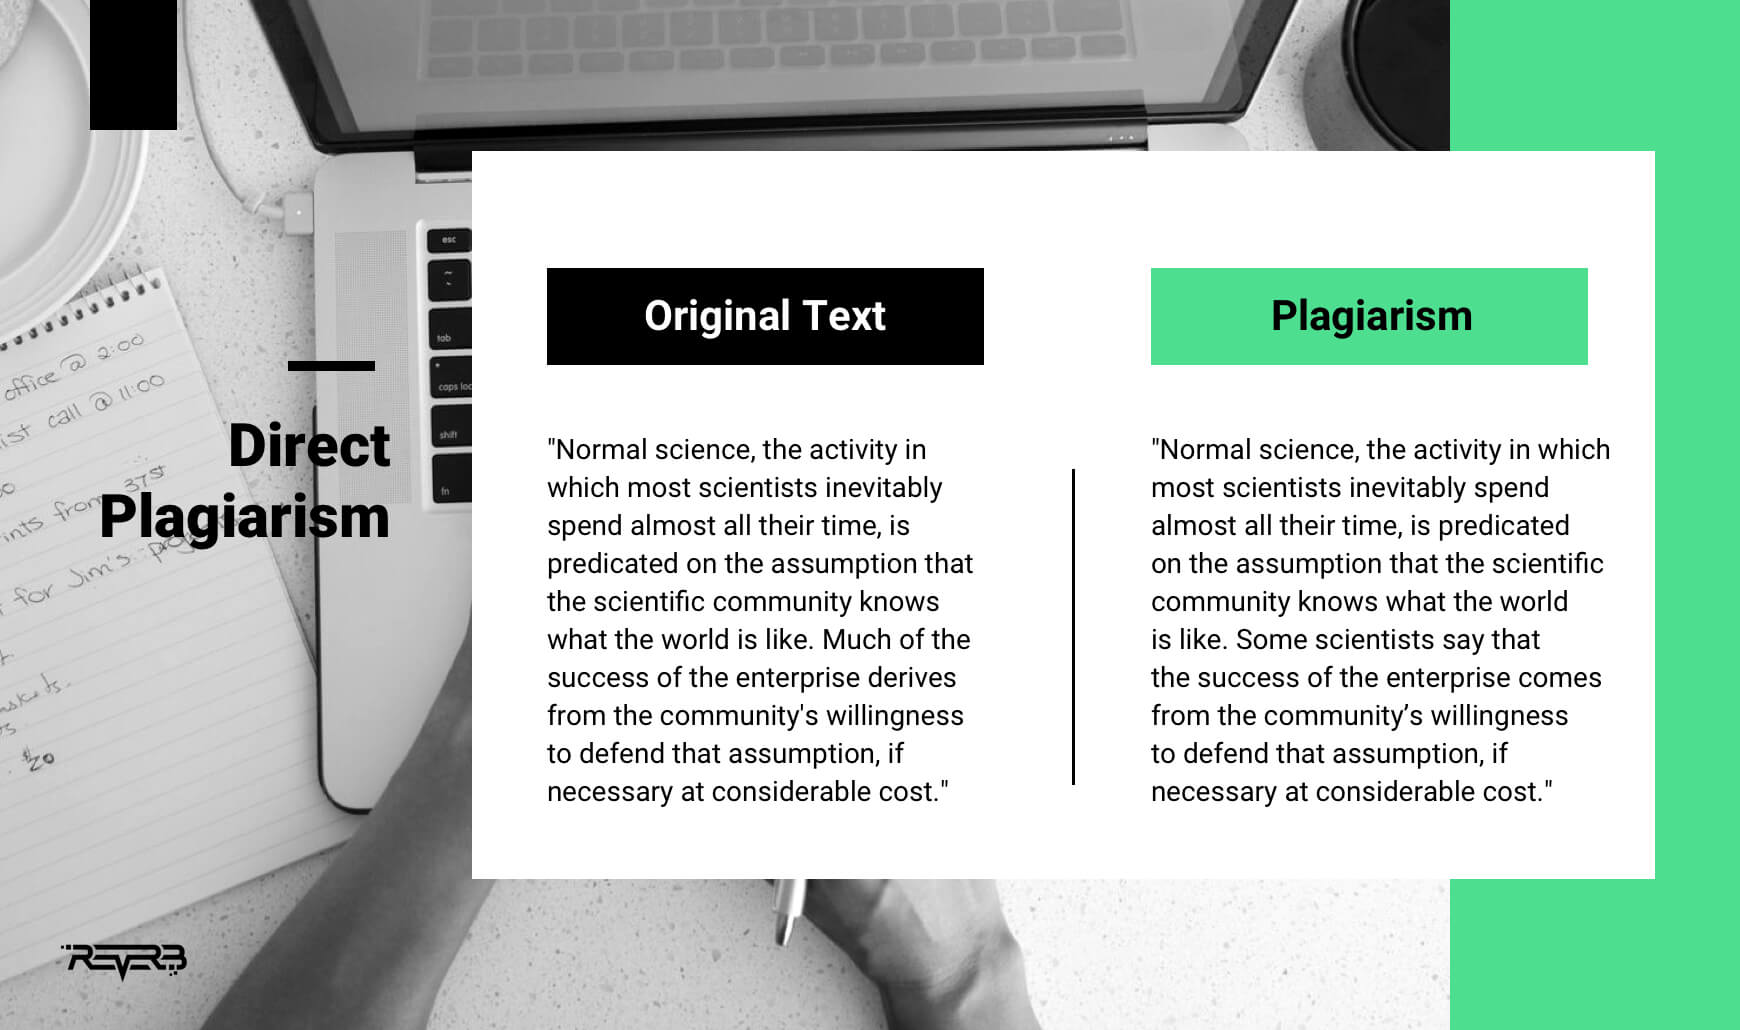 The 5 Types of Plagiarism